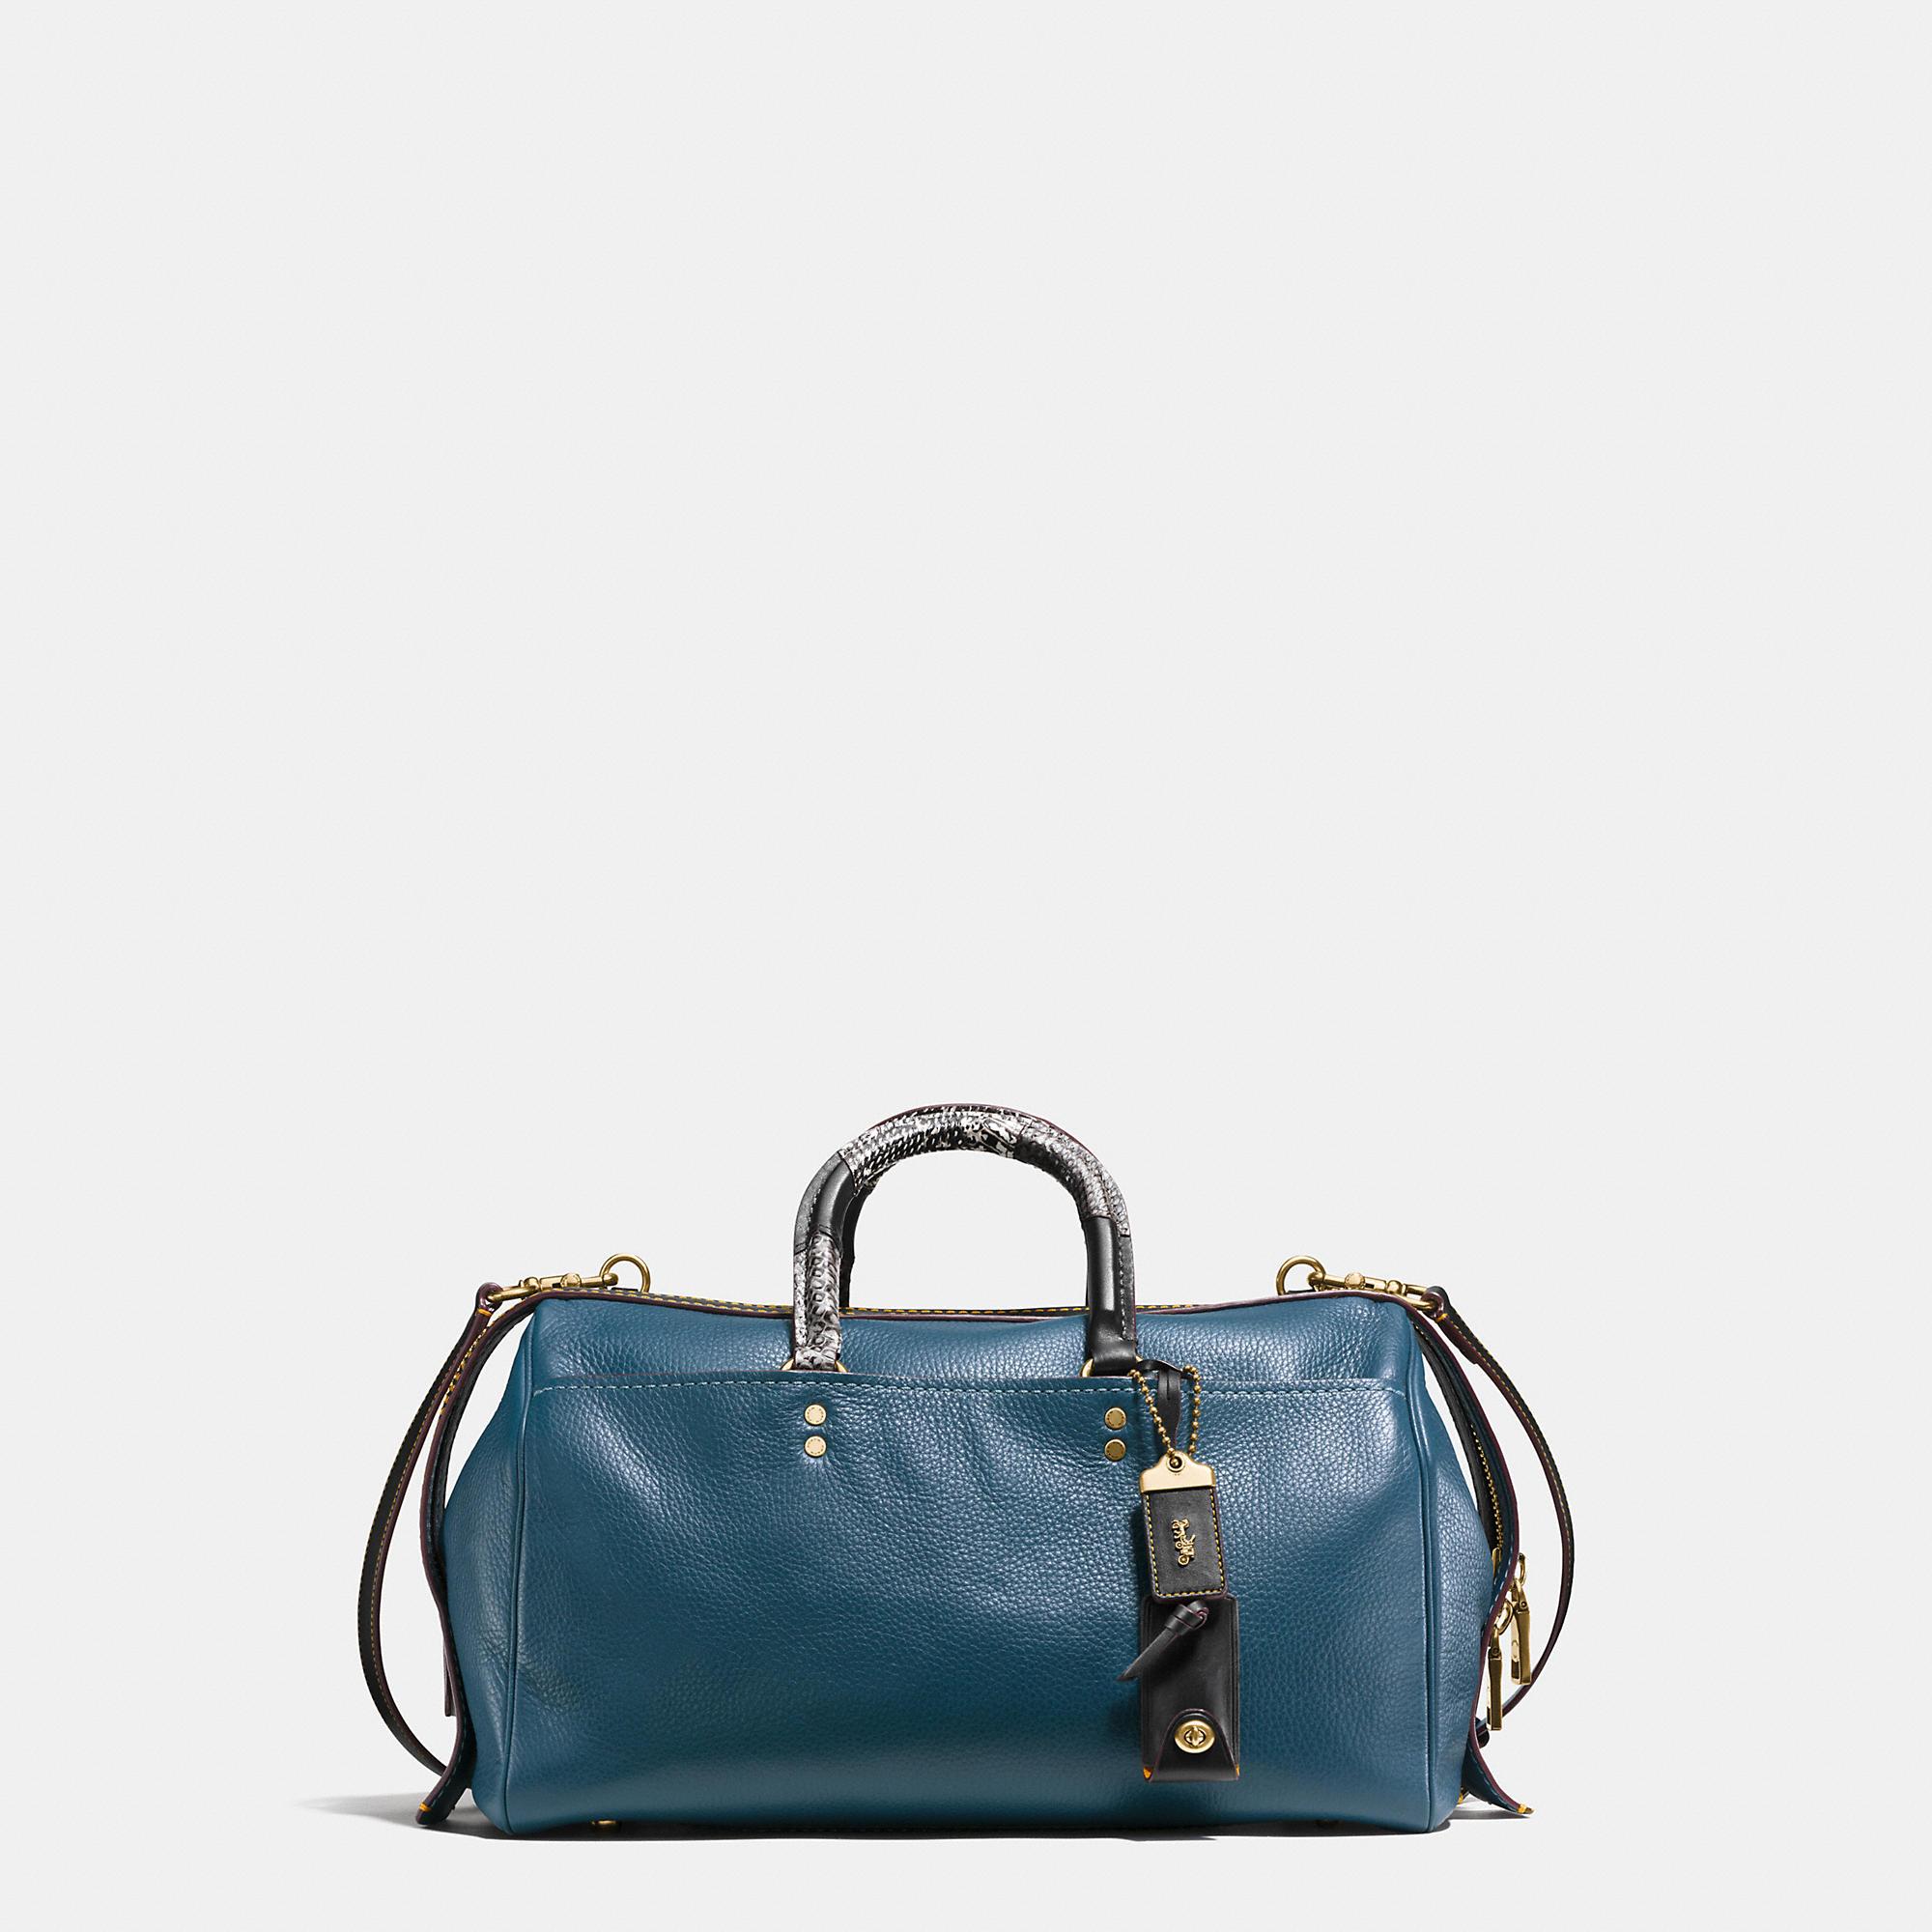 Lyst - Coach Rogue Satchel In Glovetanned Pebble Leather With Patchwork ...